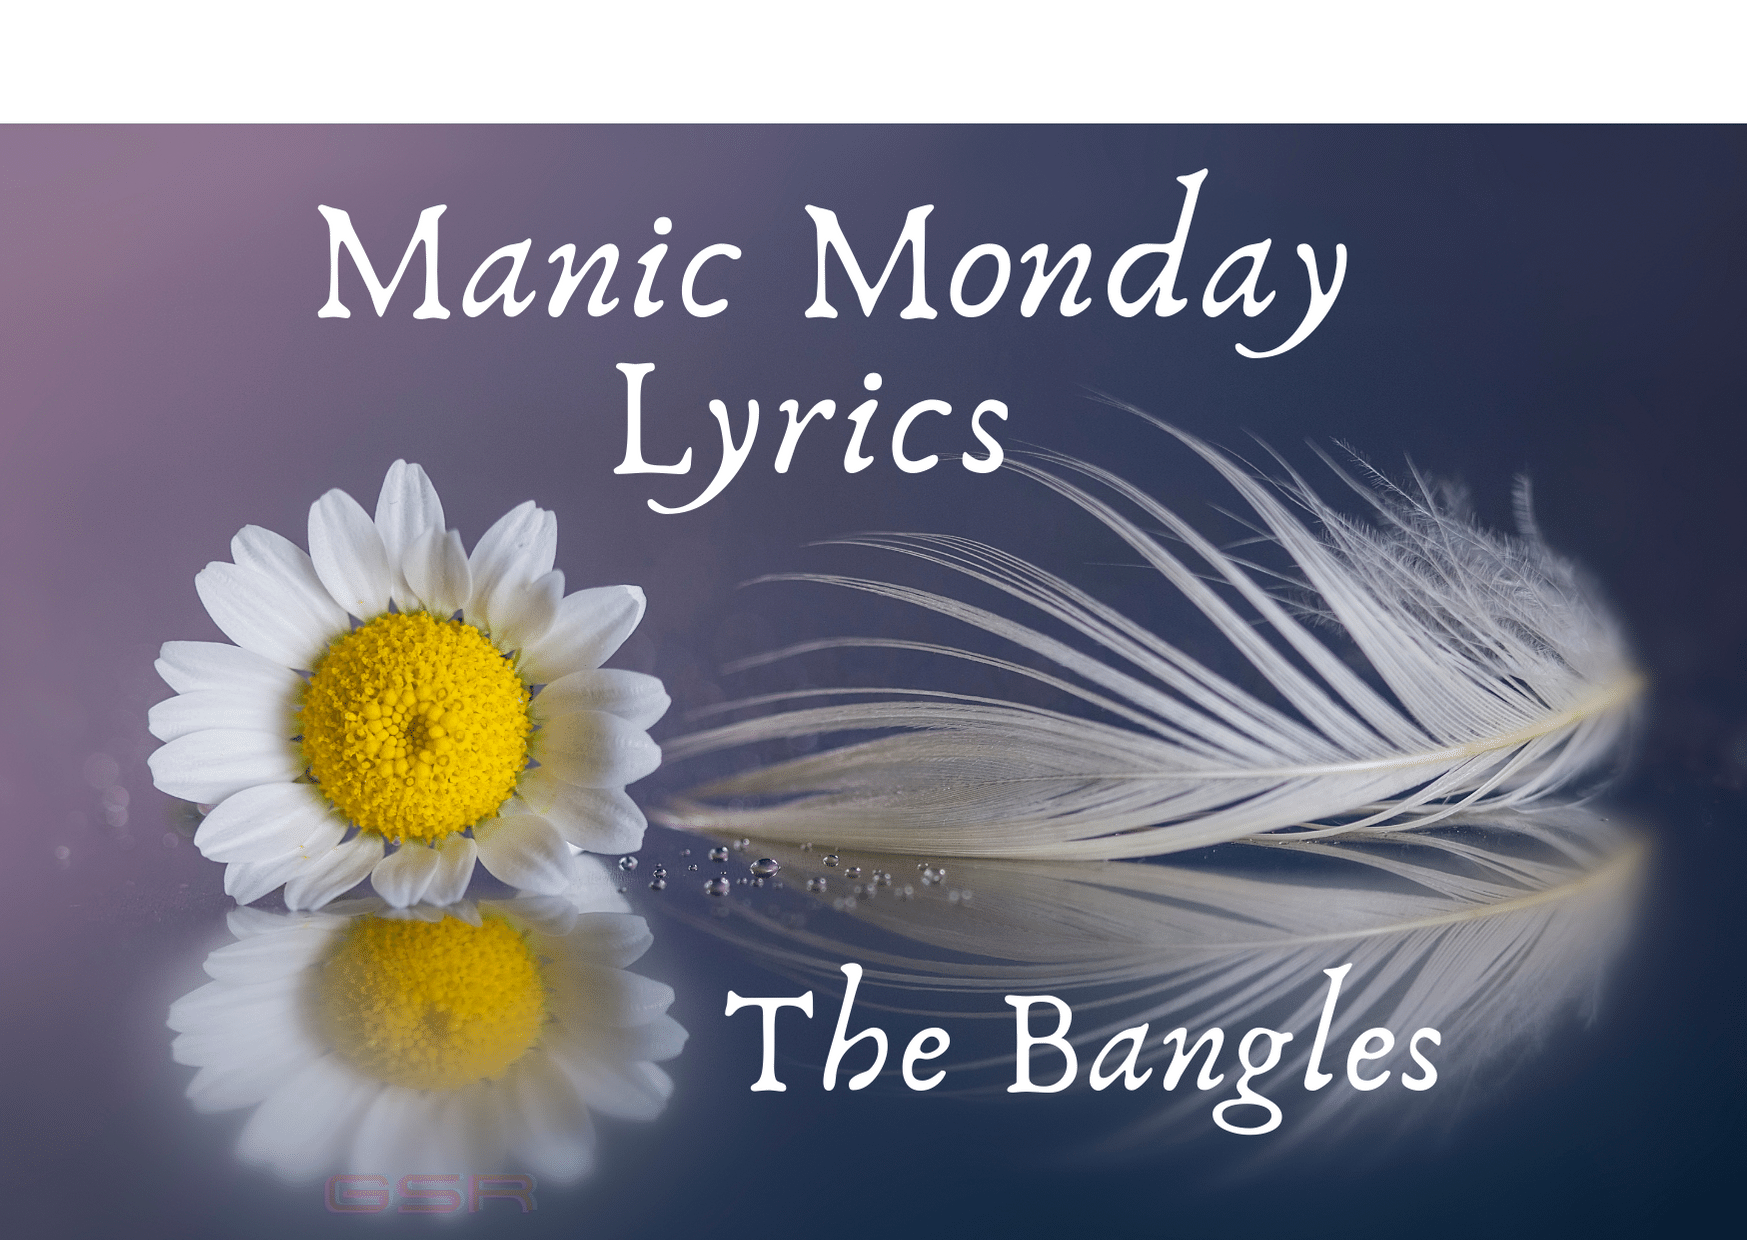 The Bangles Manic Monday Lyrics Manic Monday Lyrics Manic Monday Lyrics  - "Manic Monday" is a song by the American pop rock band the Bangles, and the first single released from their second studio album, Different Light (1986). It was written by American musician Prince using the pseudonym "Christopher" and was originally intended for the group Apollonia 6 in 1984. Lyrically, it describes a woman who is waking up to go to work on Monday, wishing it was still Sunday so she could continue relaxing. [su_youtube url="https://youtu.be/SsmVgoXDq2w" autoplay="yes"] [su_heading]Manic Monday Lyrics [/su_heading] Six o'clock already I was just in the middle of a dream I was kissin' Valentino By a crystal blue Italian stream But I can't be late 'Cause then I guess I just won't get paid These are the days When you wish your bed was already made It's just another manic Monday I wish it was Sunday 'Cause that's my fun day My "I don't have to run" day It's just another manic Monday Have to catch an early train Got to be to work by nine And if I had an airplane I still couldn't make it on time 'Cause it takes me so long just to figure out What I'm gonna wear Blame it on the train But the boss is already there It's just another manic Monday Wish it was Sunday 'Cause that's my fun day My "I don't have to run" day It's just another manic Monday All of my nights Why did my lover have to pick last night To get down? (Last night, last night) Doesn't it matter That I have to feed the both of us Employment's down He tells me in his bedroom voice "C'mon honey, let's go make some noise" Time it goes so fast (When you're having fun) It's just another manic Monday I wish it was Sunday 'Cause that's my fun day "I don't have to run" day It's just another manic Monday I wish it was Sunday 'Cause that's my fun day It's just a manic Monday